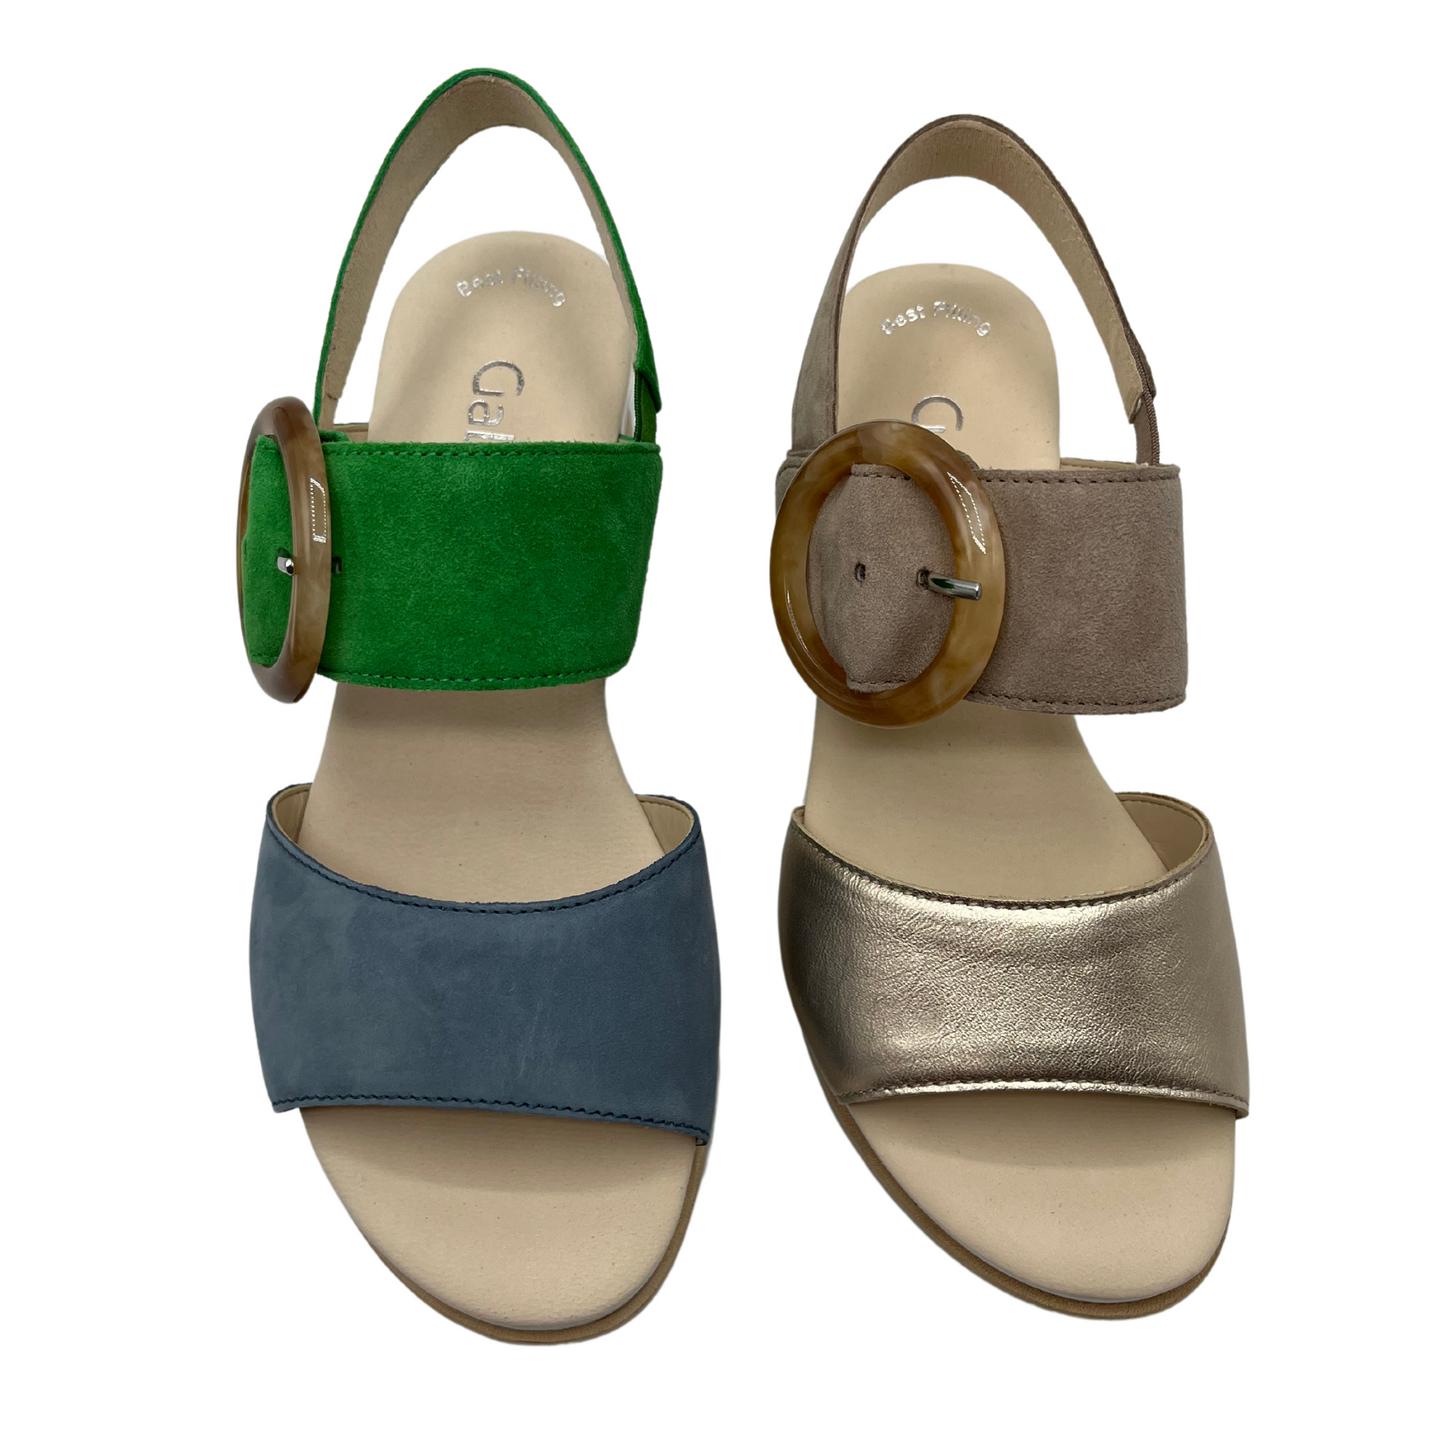 Top view of two open toed sandals side by side. One is blue and green and one is gold and taupe